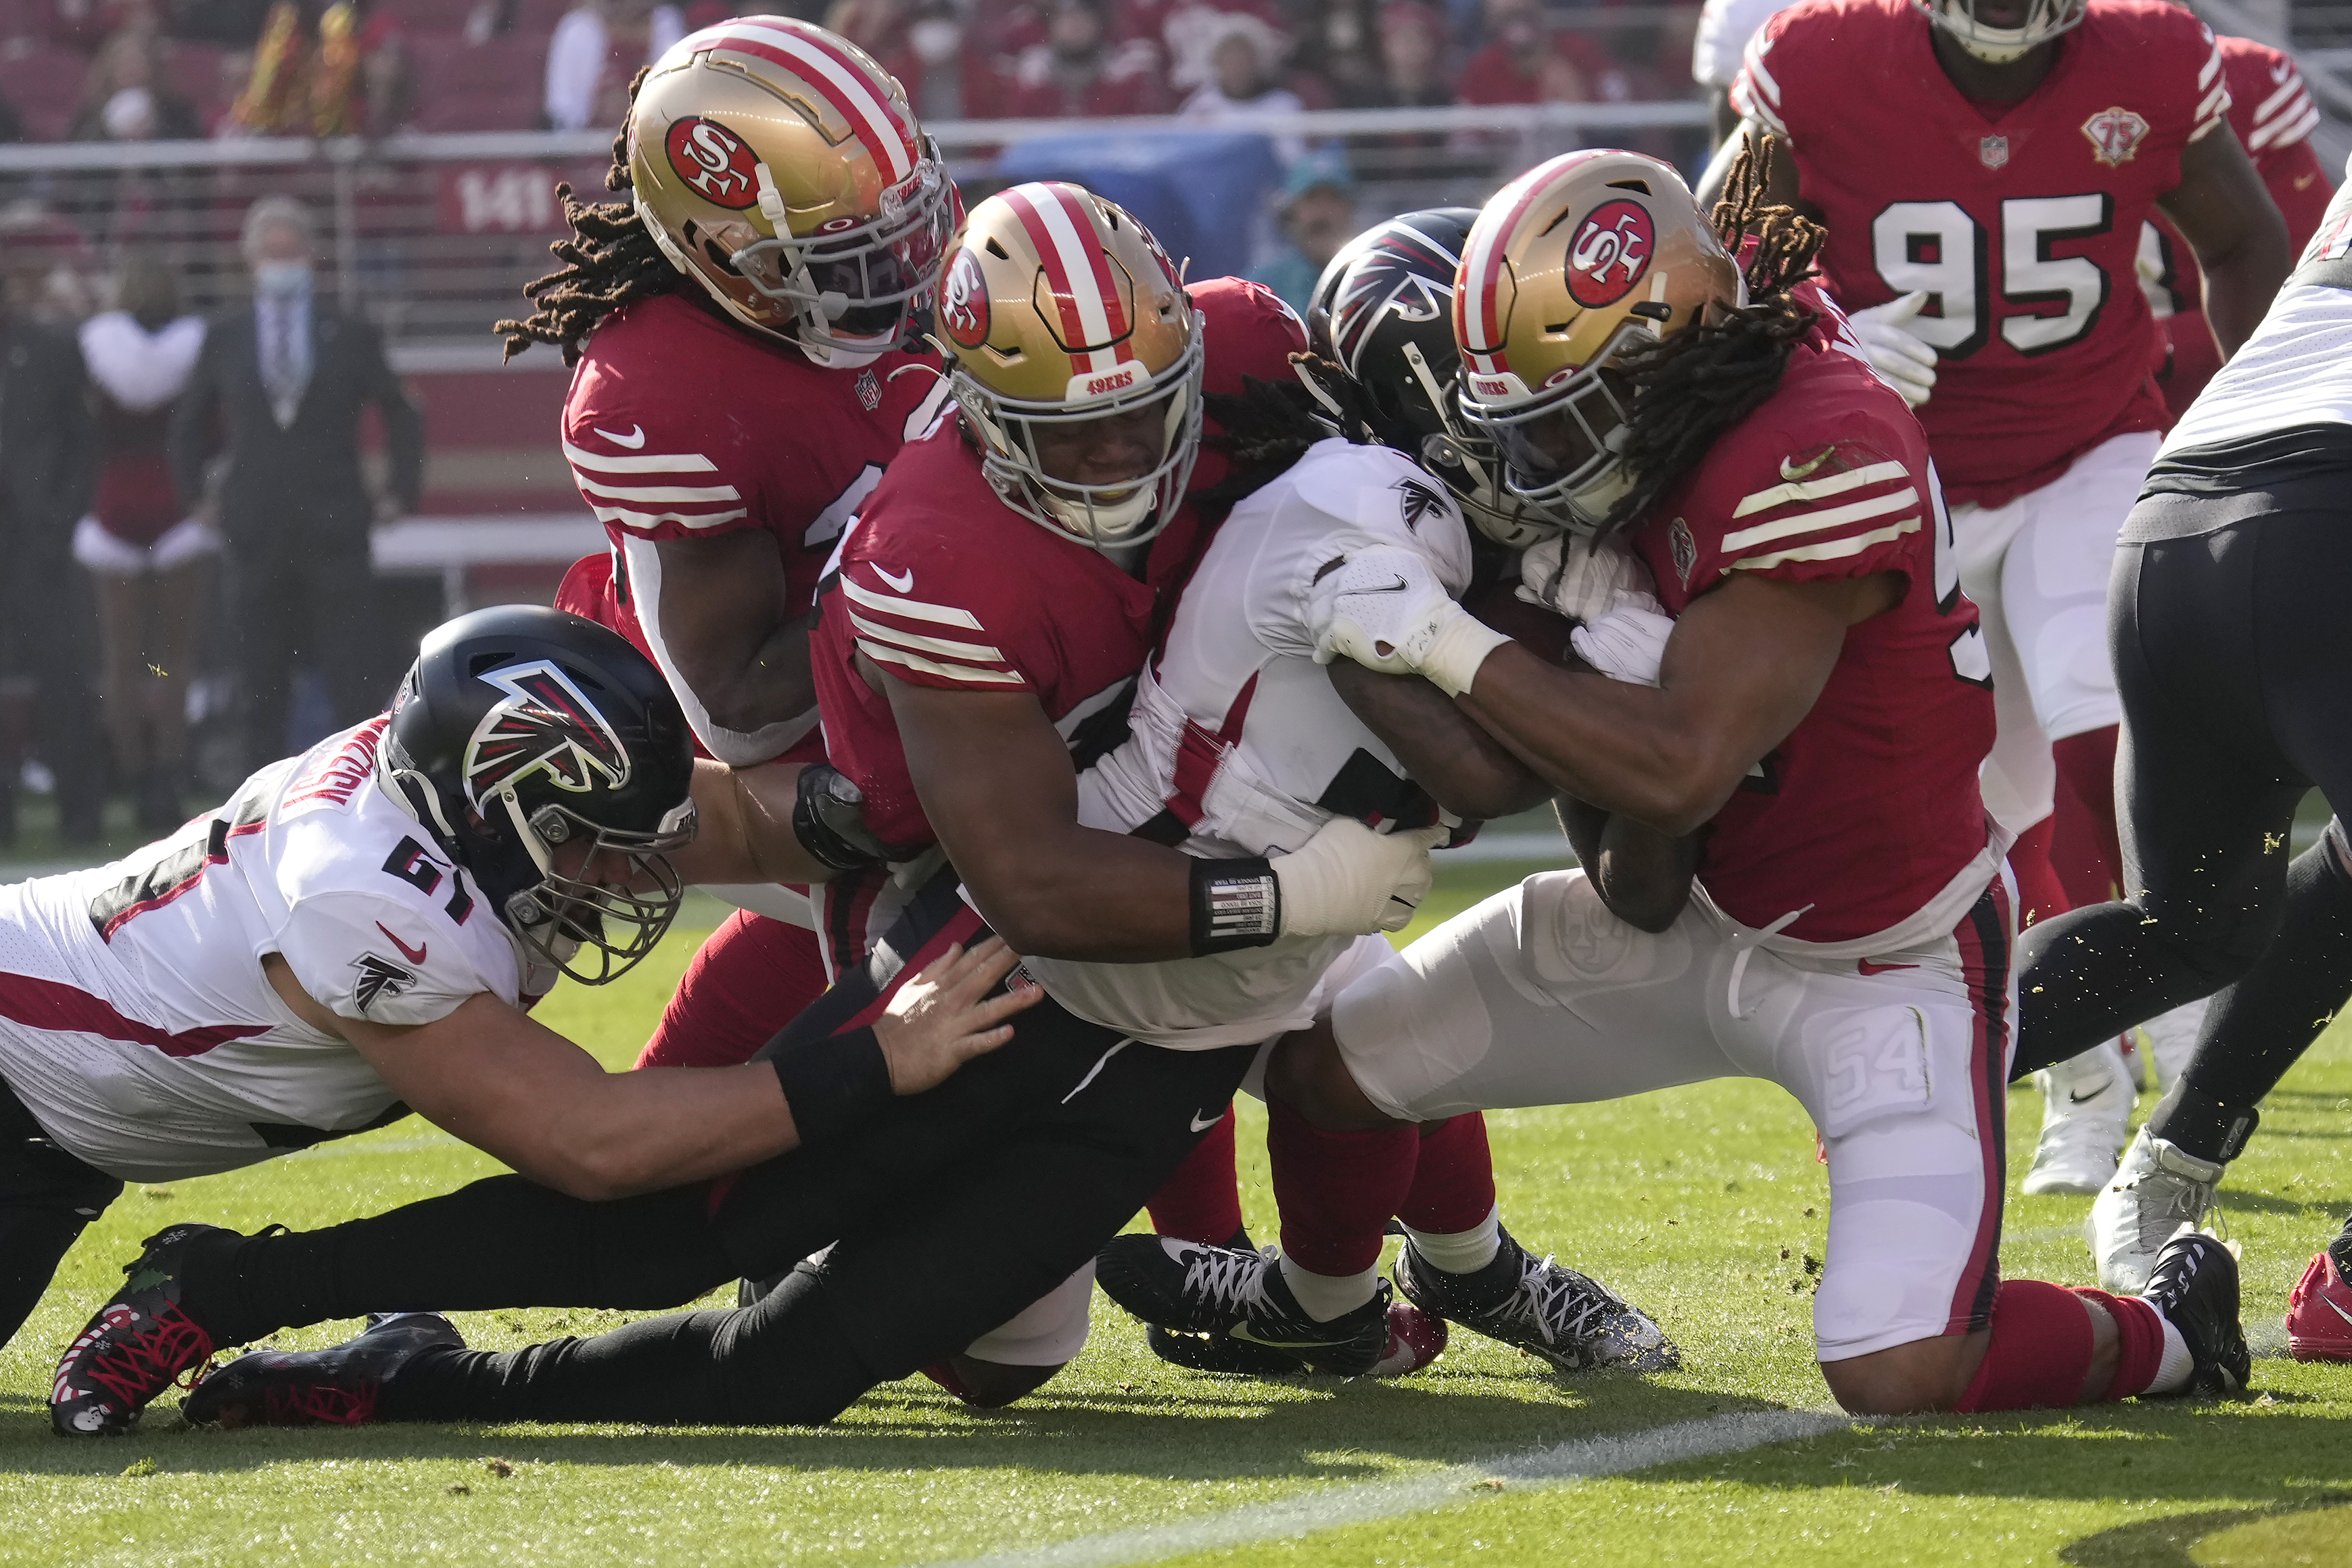 Atlanta Falcons running back Cordarrelle Patterson, middle right, is tackled at the goal line by San Francisco 49ers defensive tackle Kevin Givens, middle, and middle linebacker Fred Warner, right, during an NFL game.